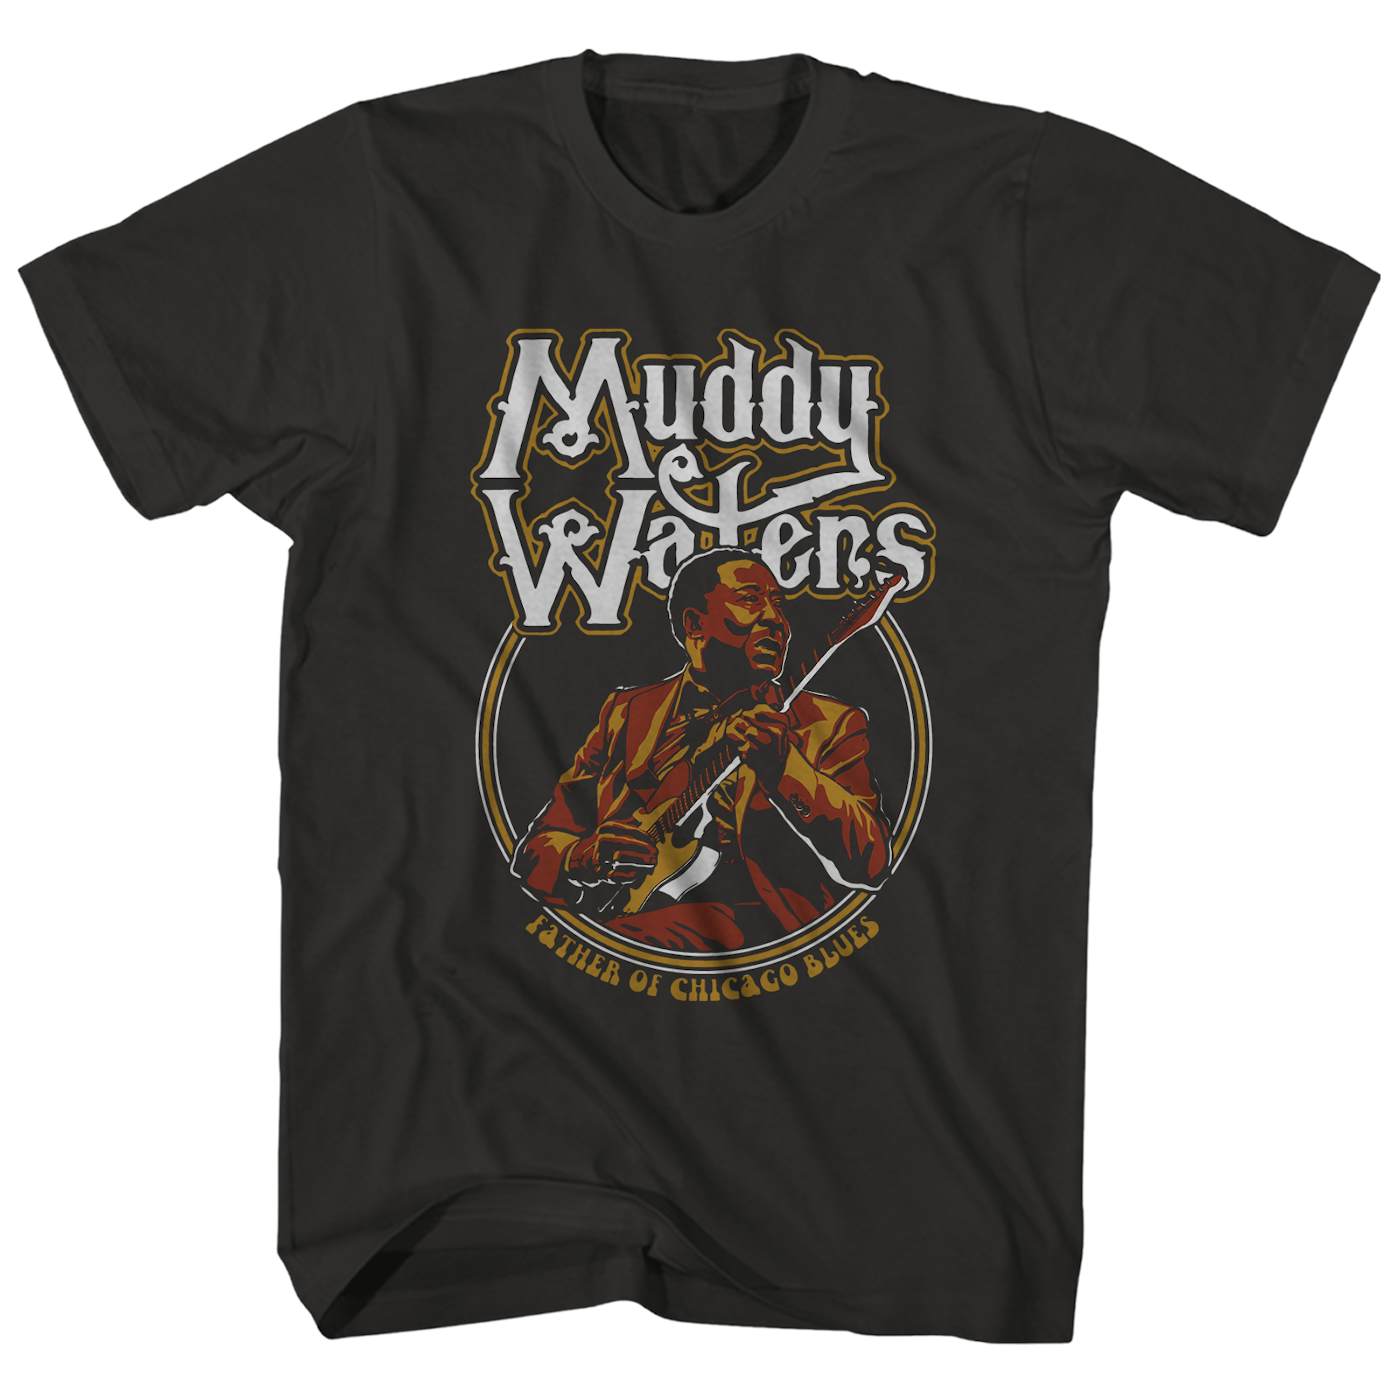 Muddy Waters T-Shirt | Father Of Chicago Blues Muddy Waters Shirt